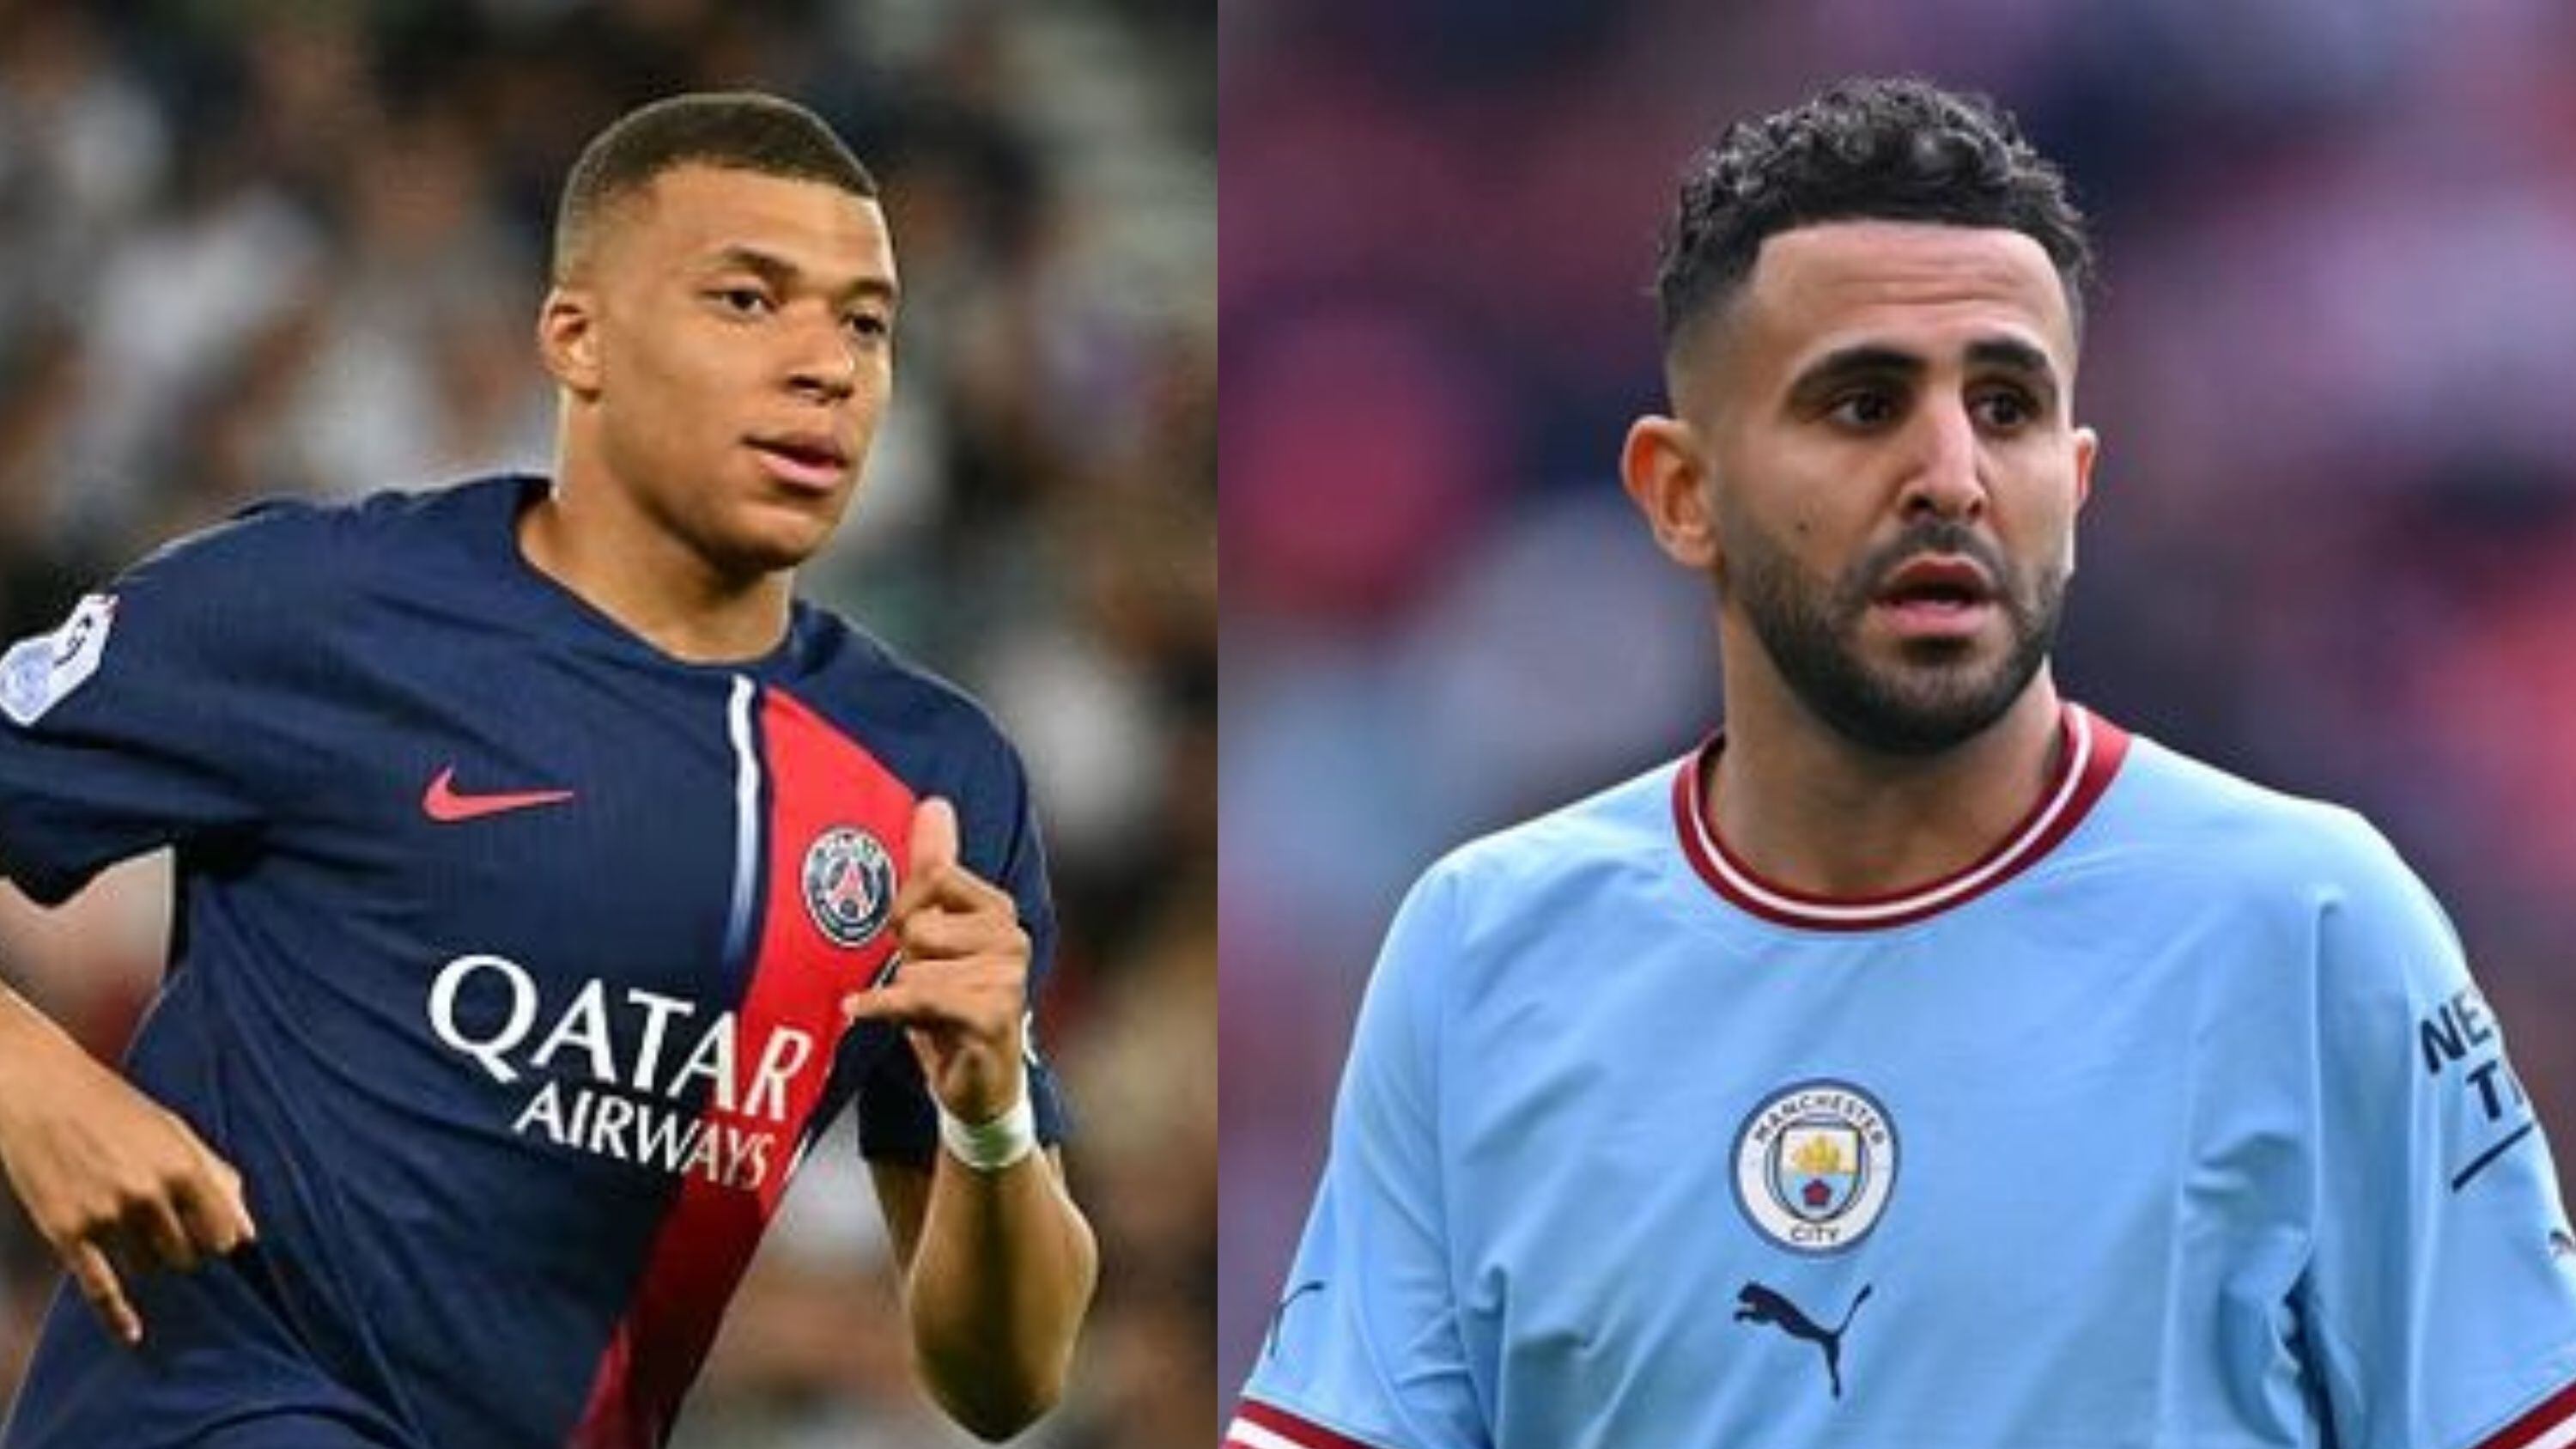 While Mbappe is worth 200 million, what Arabia will pay for Mahrez